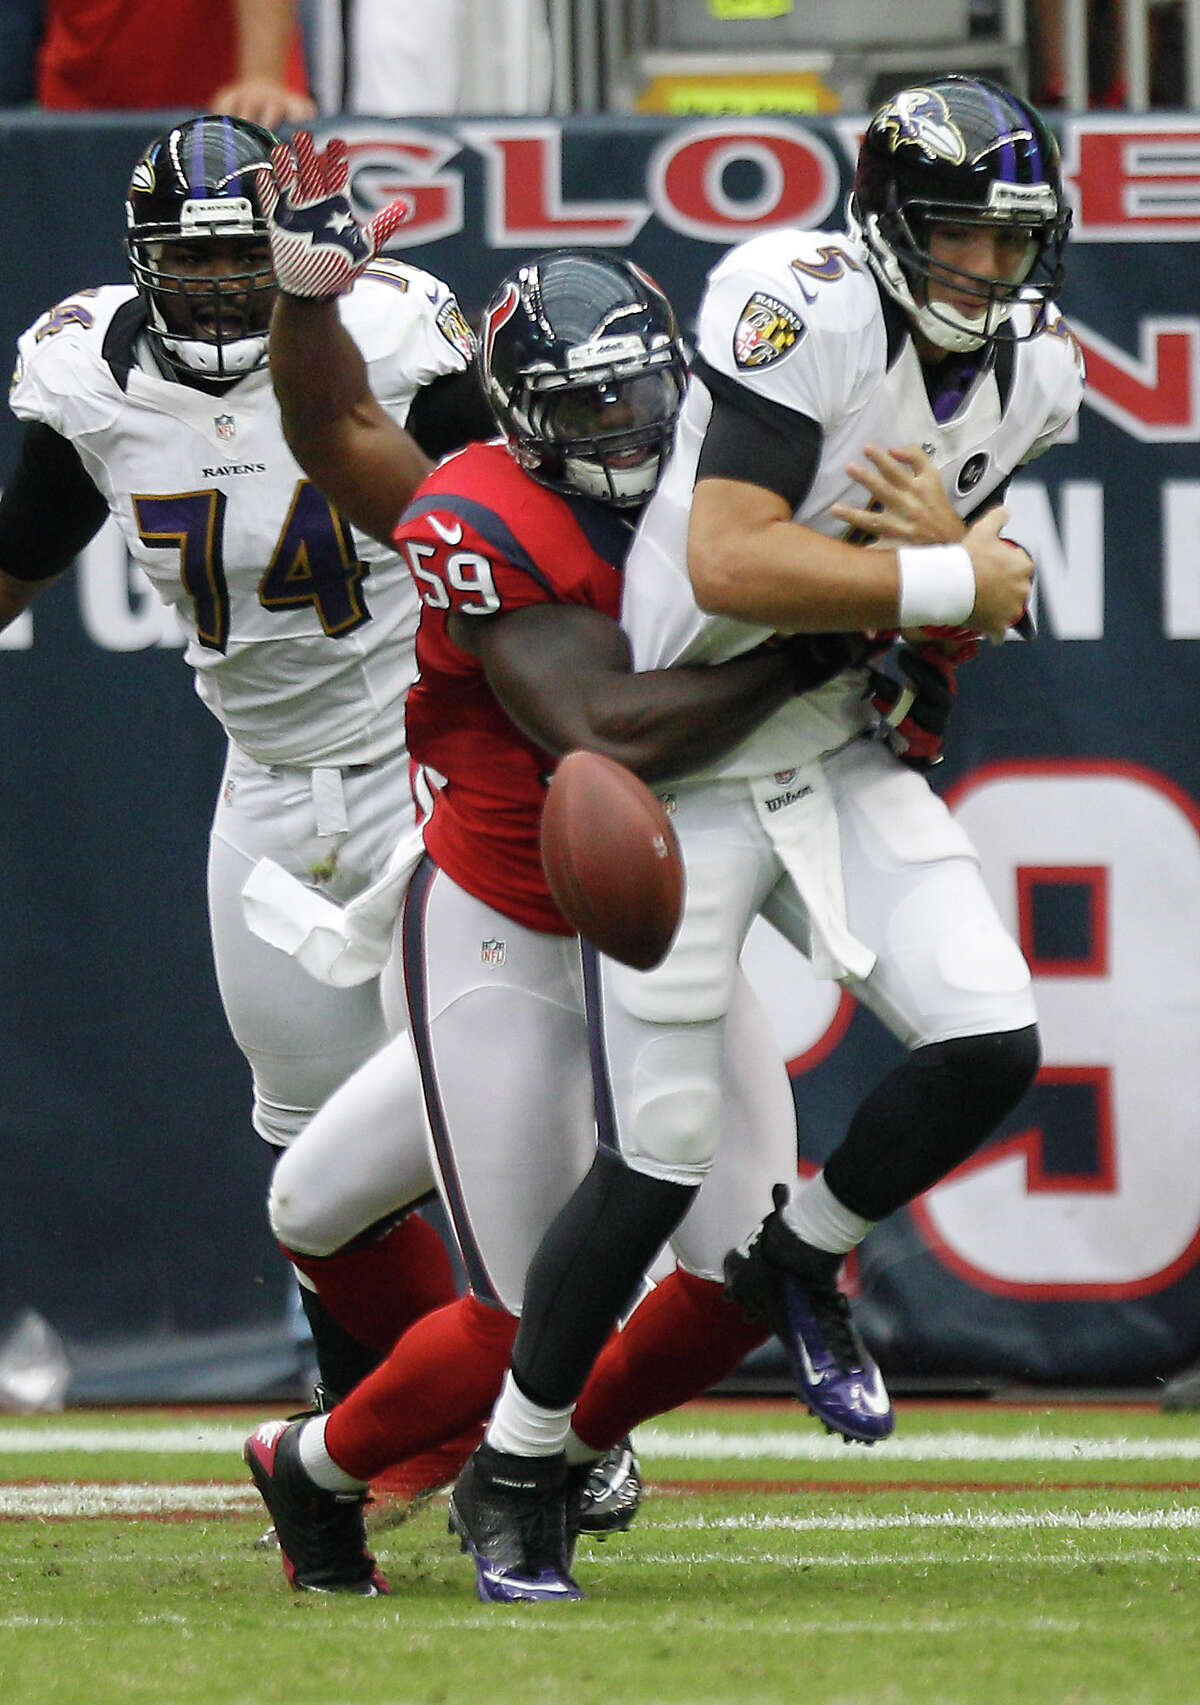 Baltimore Ravens quarterback Joe Flacco (5) gets the ball stripped from him by Houston Texans linebacker Whitney Mercilus (59) during the first quarter at Reliant Stadium on Sunday, Oct. 21, 2012, in Houston. ( Brett Coomer / Houston Chronicle )